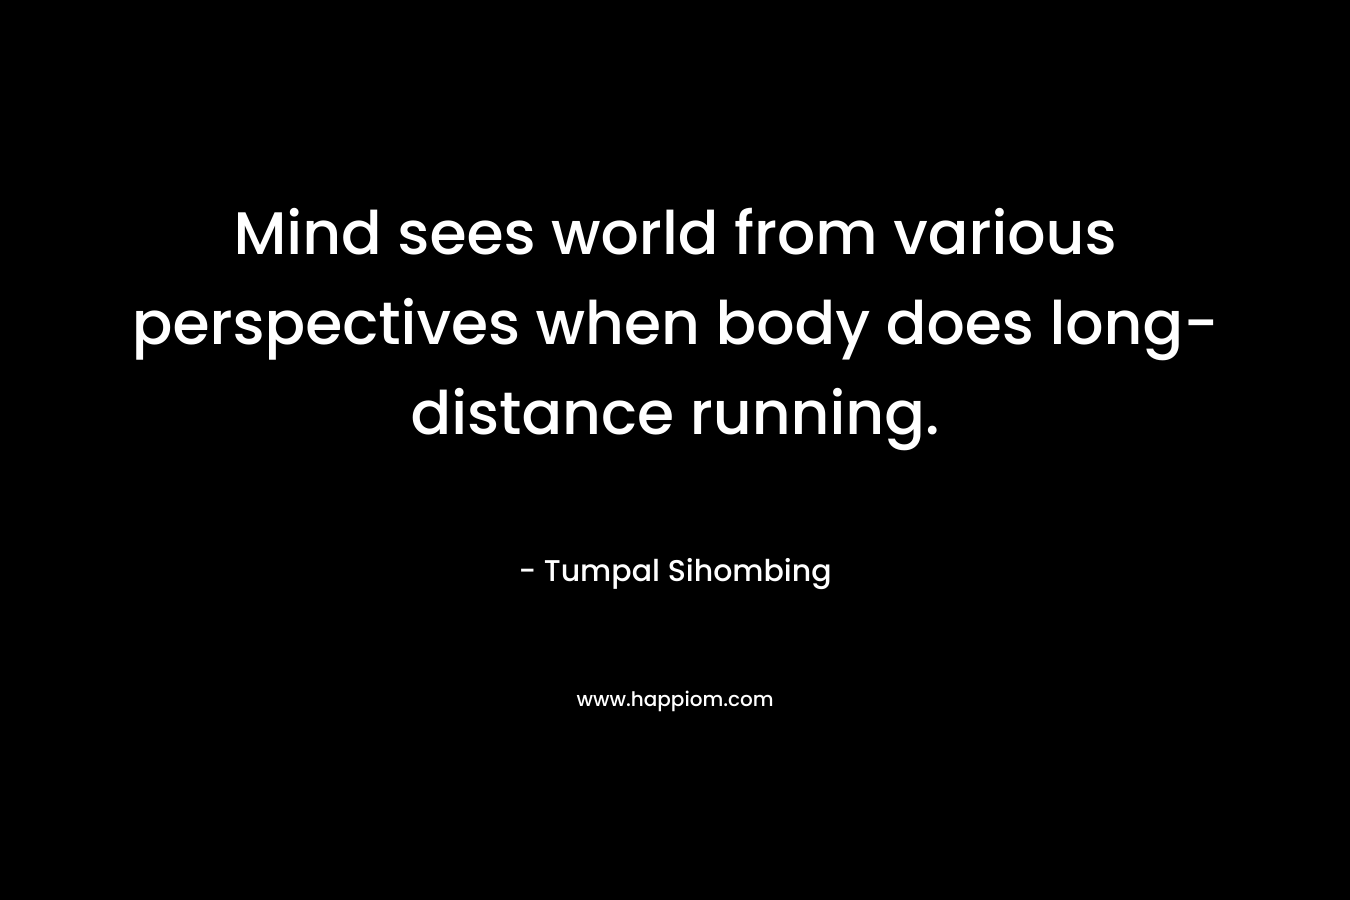 Mind sees world from various perspectives when body does long-distance running.